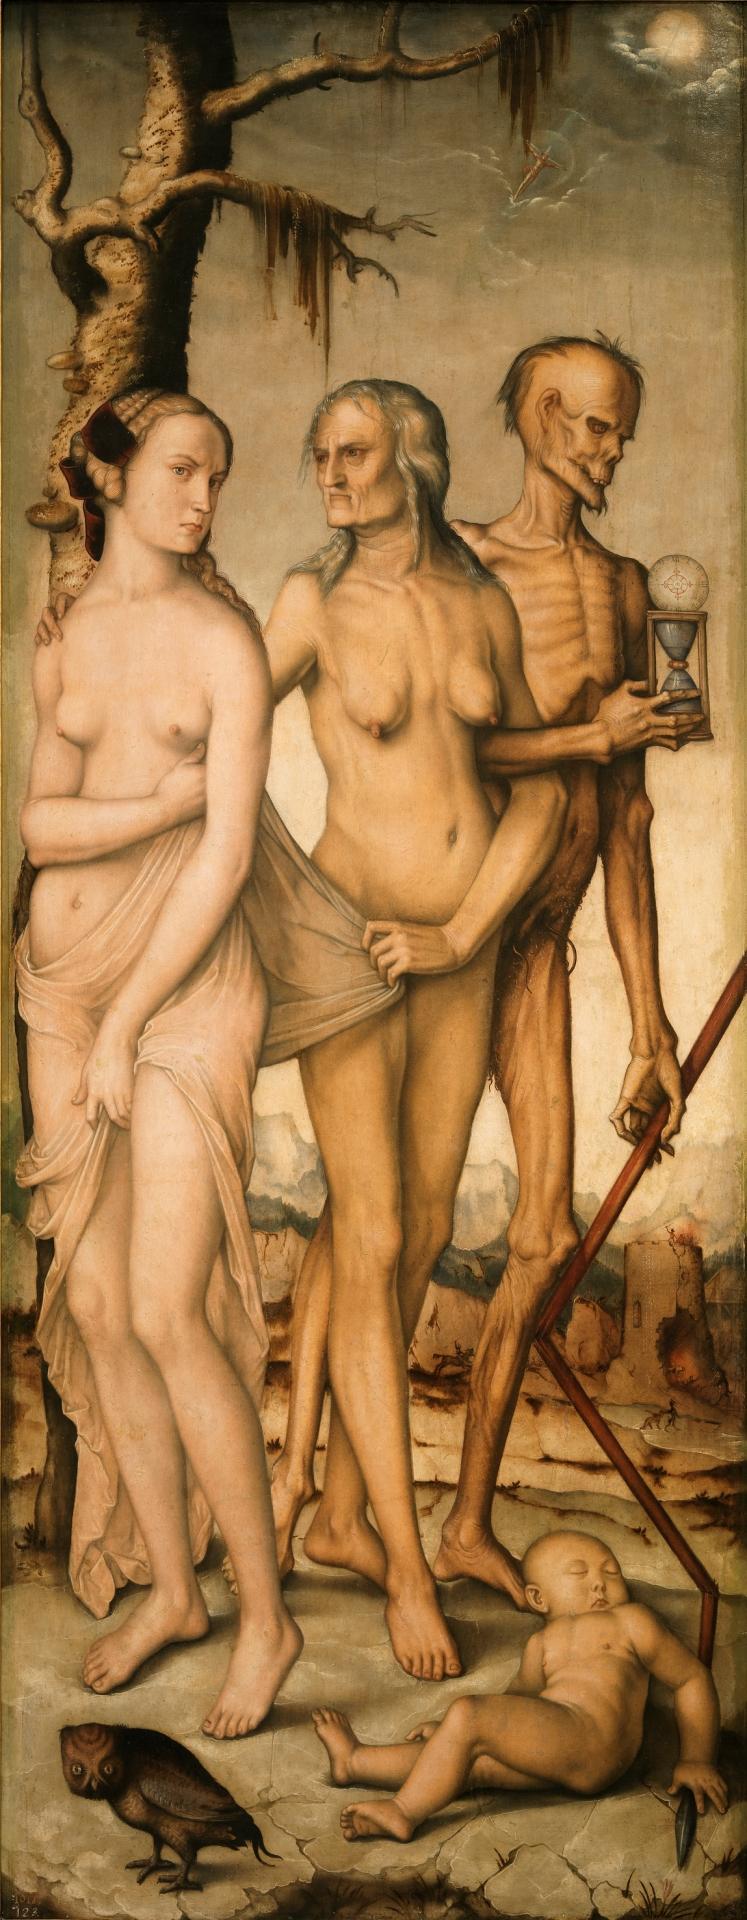 The Three Ages of Man and Death, Hans Baldung
(1541–1544)